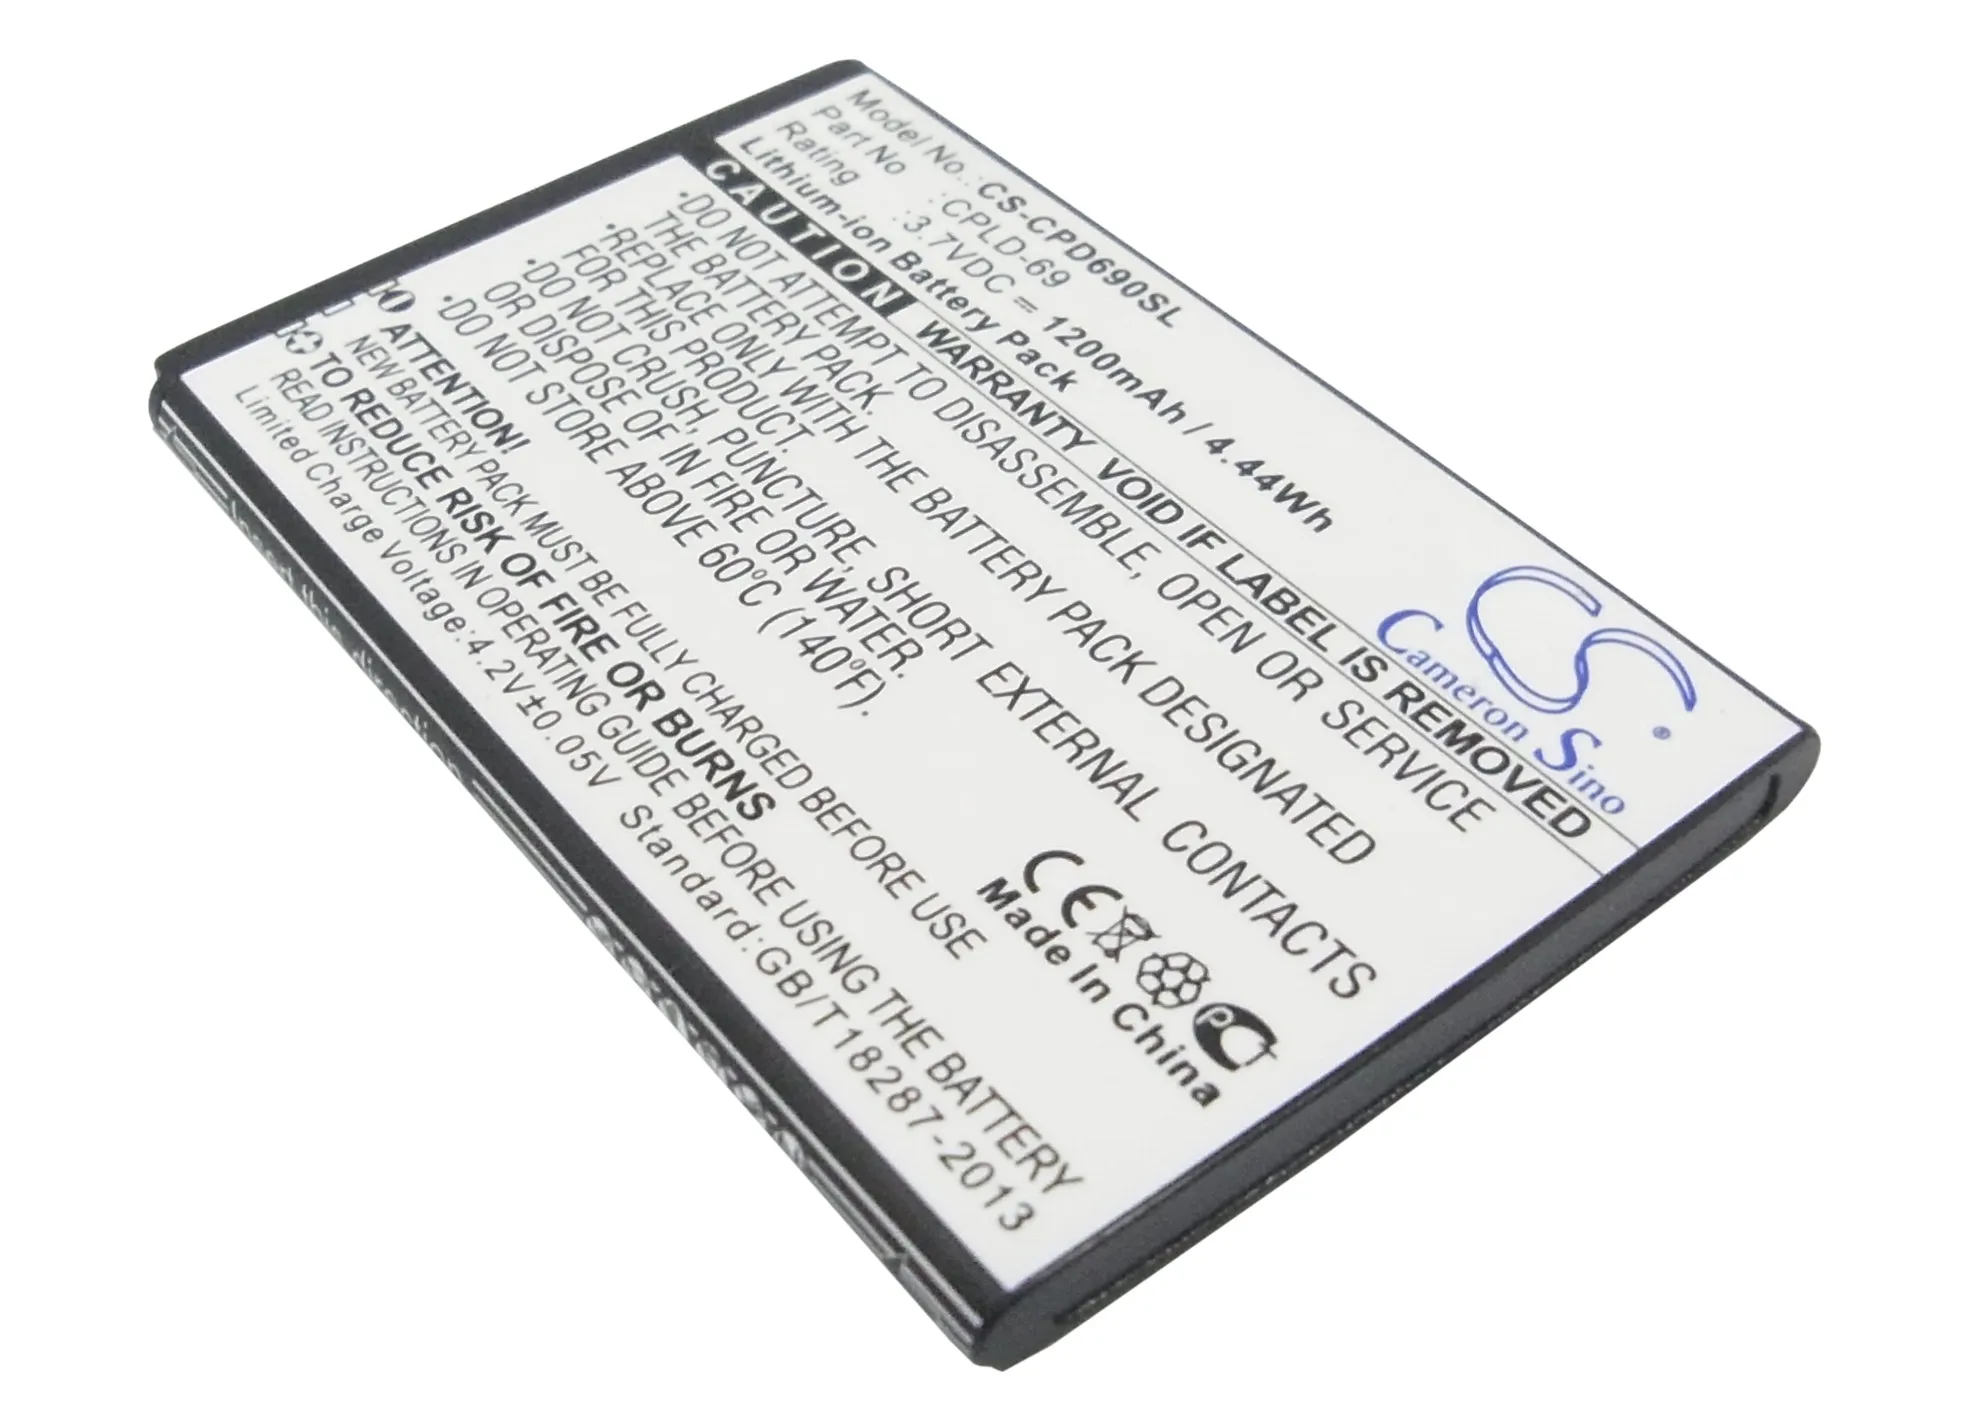 

CS 1200mAh / 4.44Wh battery for Coolpad 8809 CPLD-69